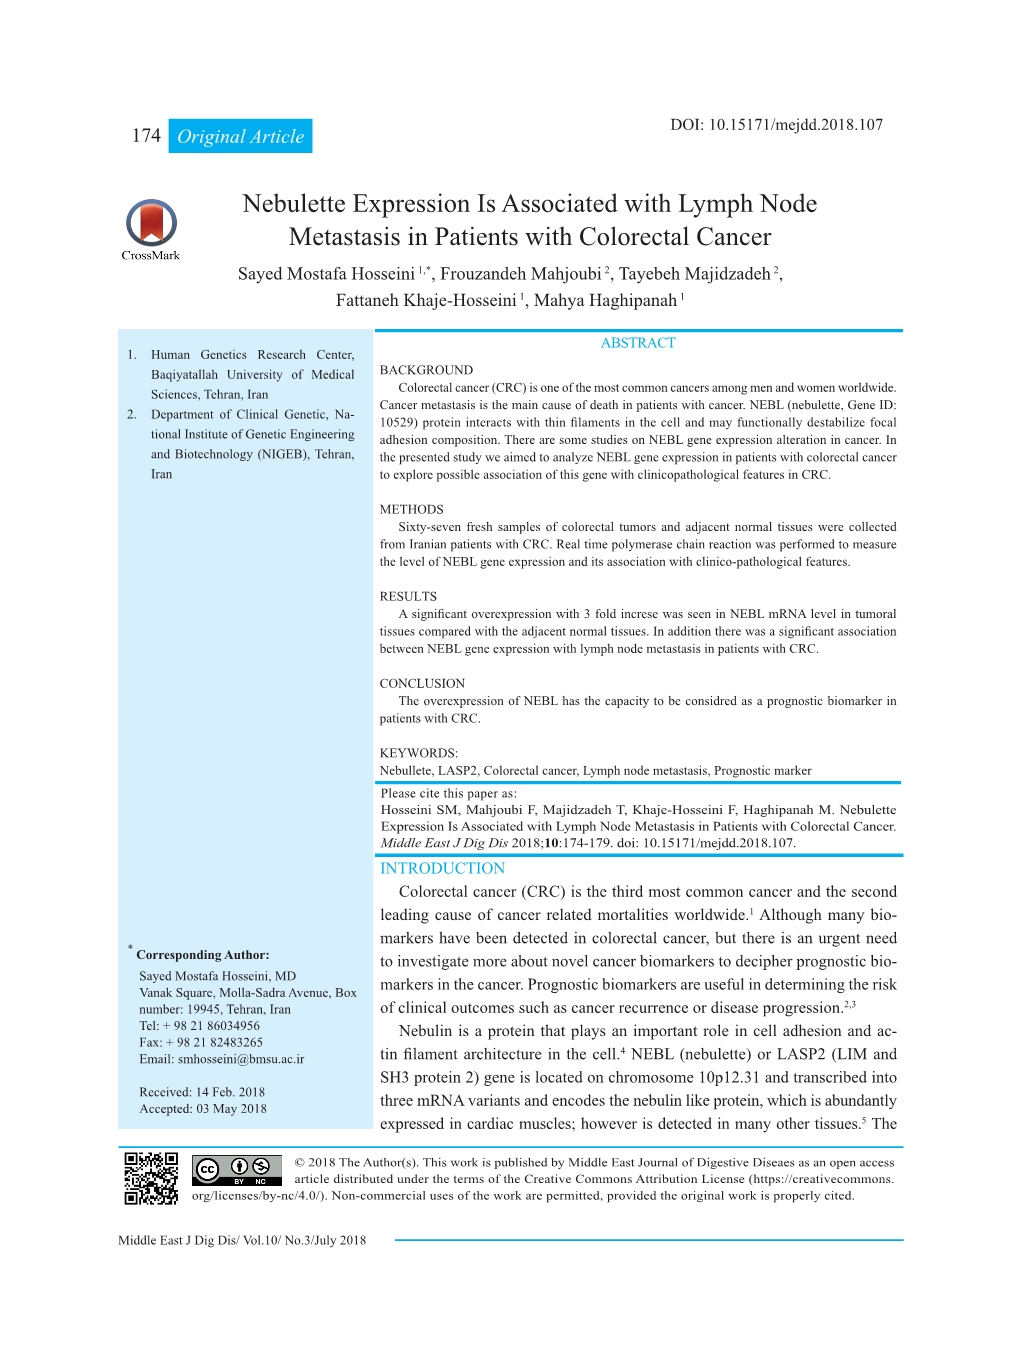 Nebulette Expression Is Associated with Lymph Node Metastasis In